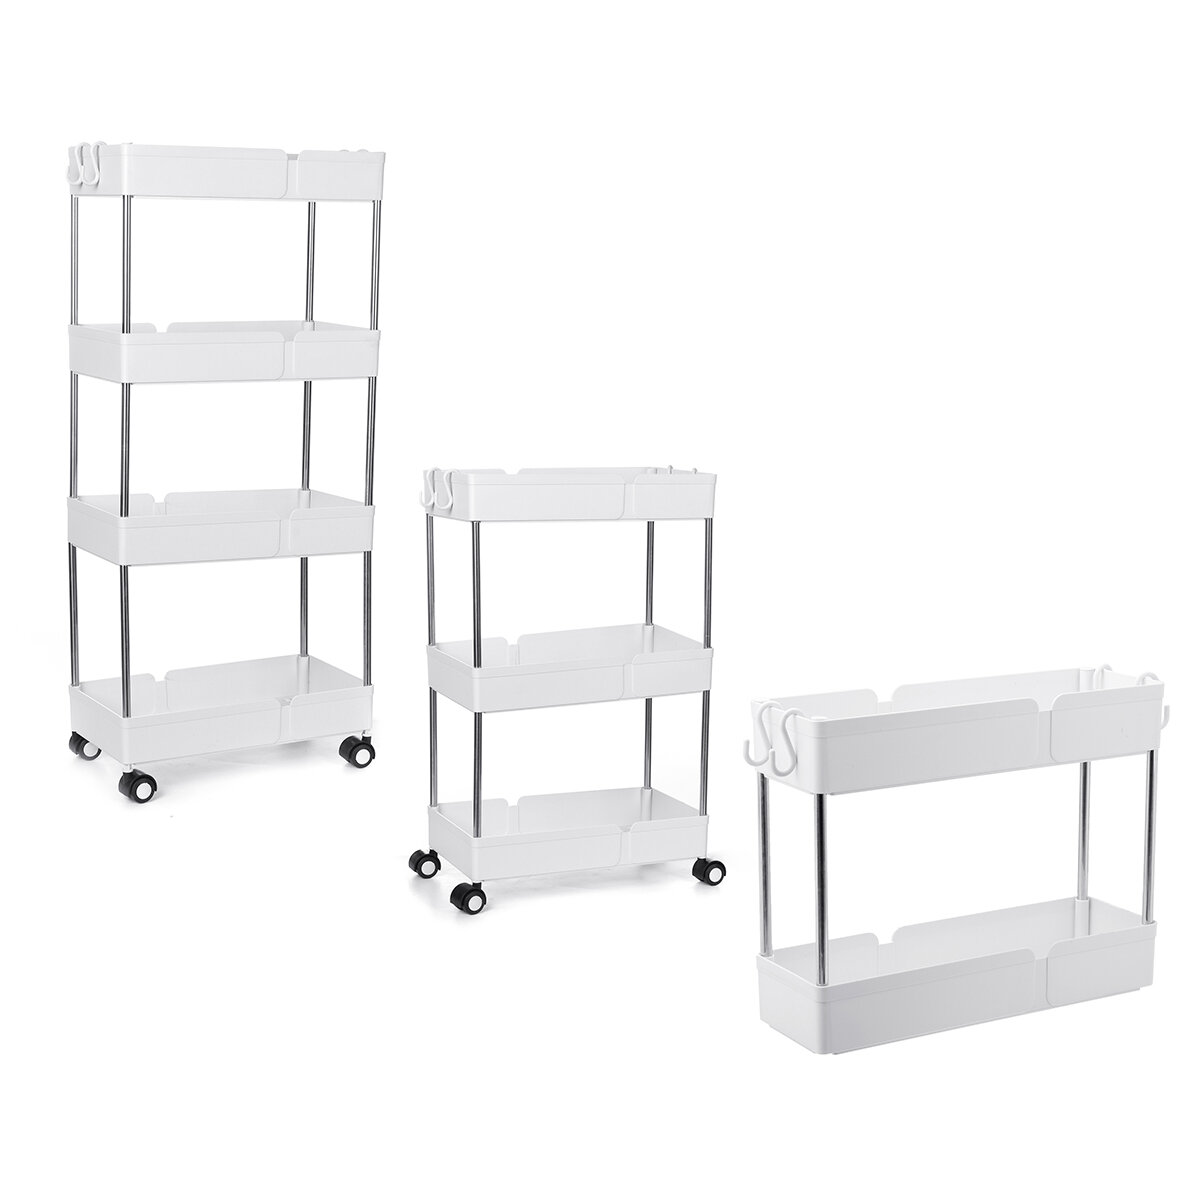 Image of 2/3/4 Rolling Trolley Storage Holder Rack Organiser With Wheels For Kitchen Bathroom Office